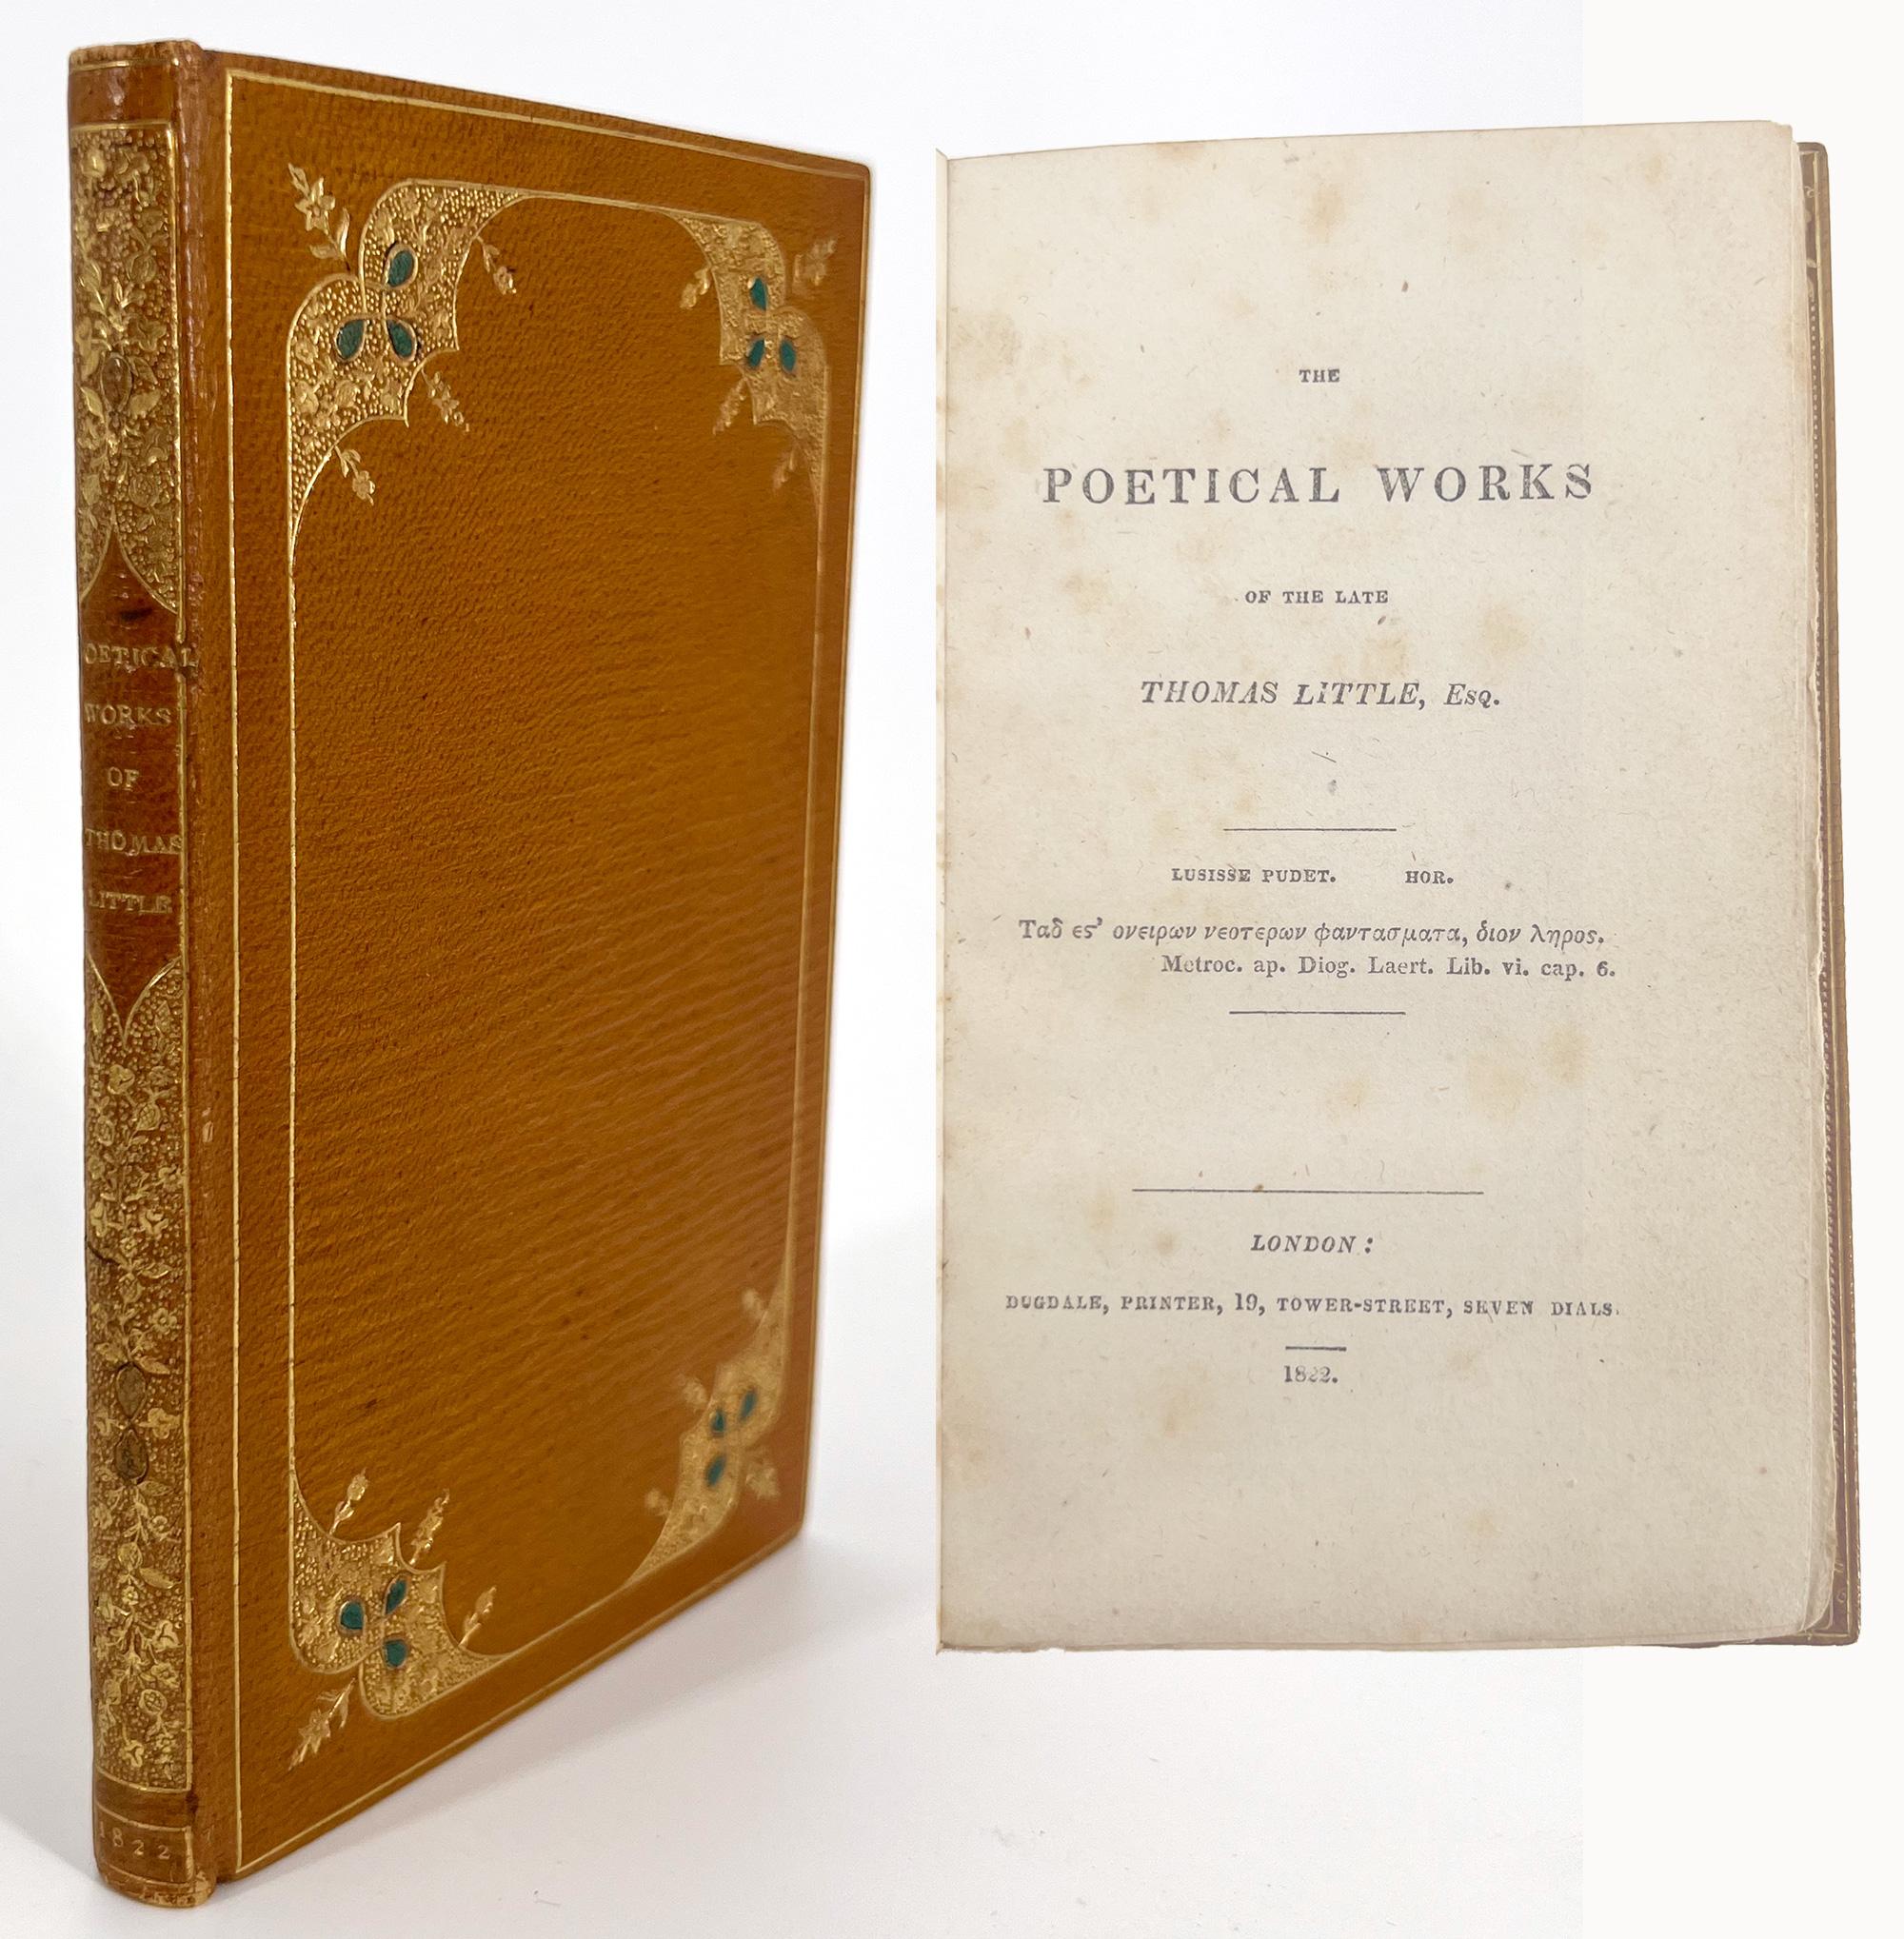 A handsomely-bound collection of juvenile poetry by Thomas Moore (1779 – 1852), published under the pseudonym of Thomas Little due to the eroticism of their content, as Moore's celebration of kisses and embraces was regarded as improper. A